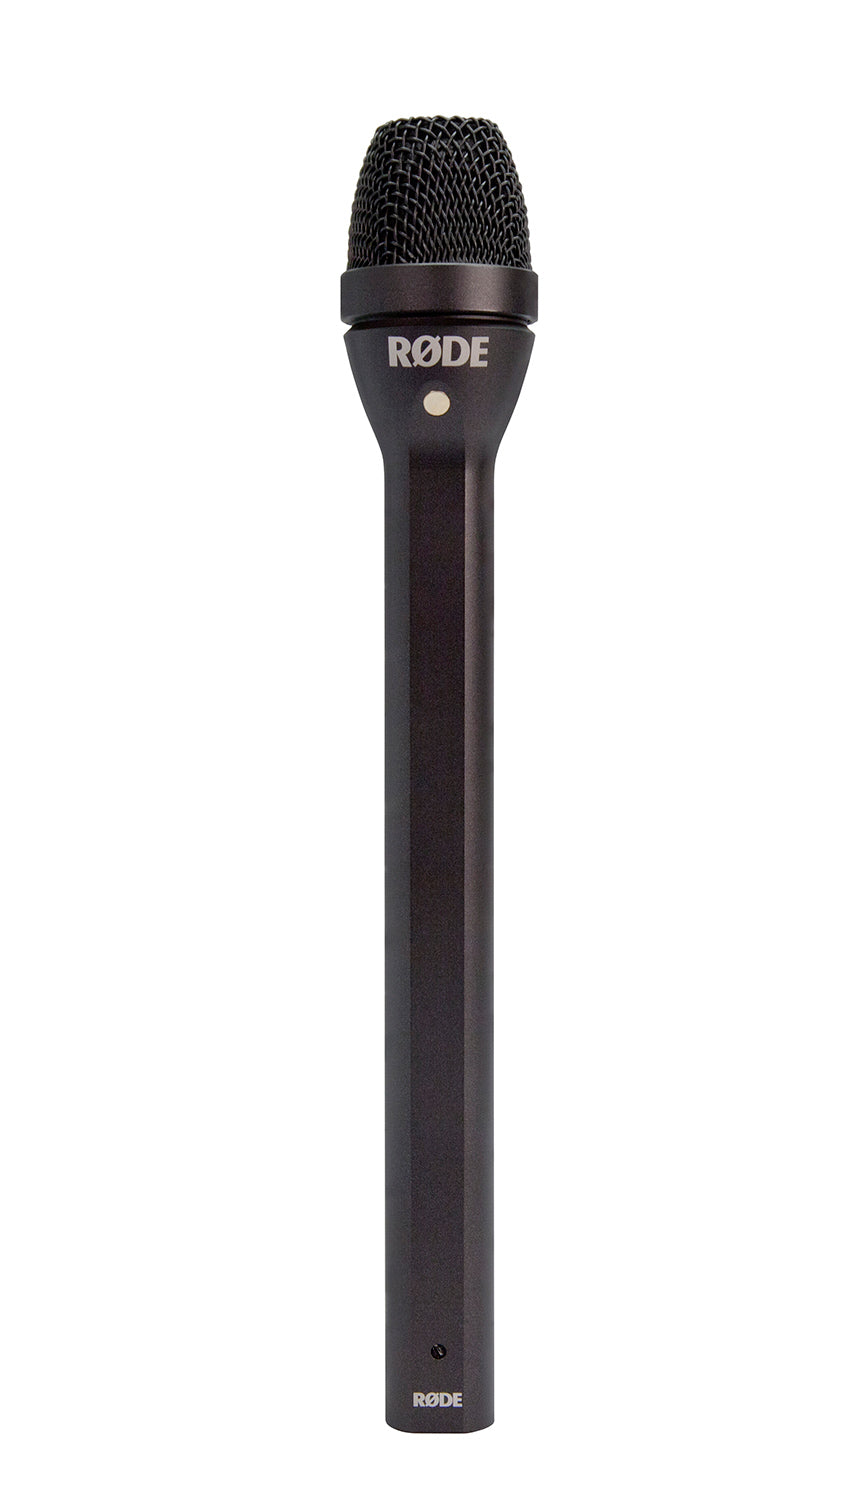 Rode Reporter Omnidirectional Handheld Interview Microphone 10 Years Warranty [Made in Australia], RODE, MICROPHONE, rode-microphone-reporter, ZOSO MUSIC SDN BHD